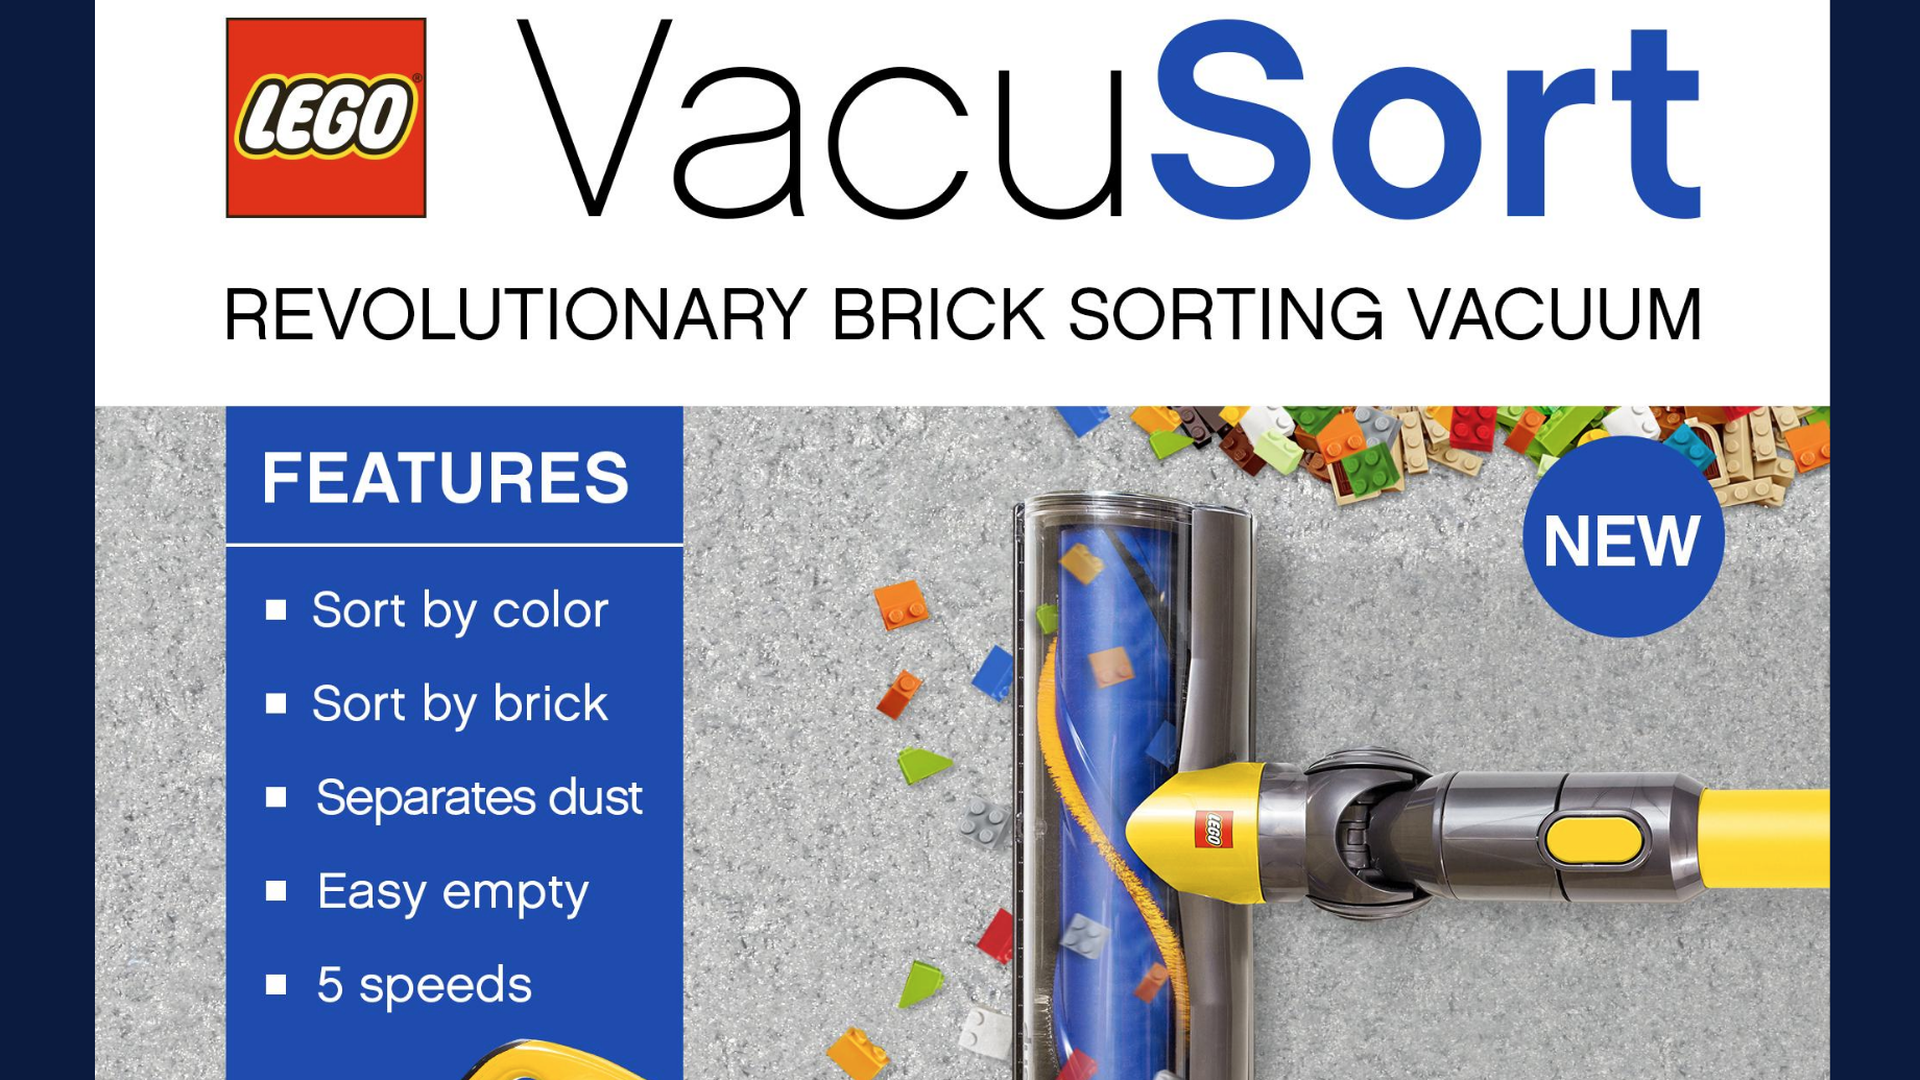 Lego's April Fools' Day prank was an ad for a vacuum capable of sucking up and sorting the plastic bricks